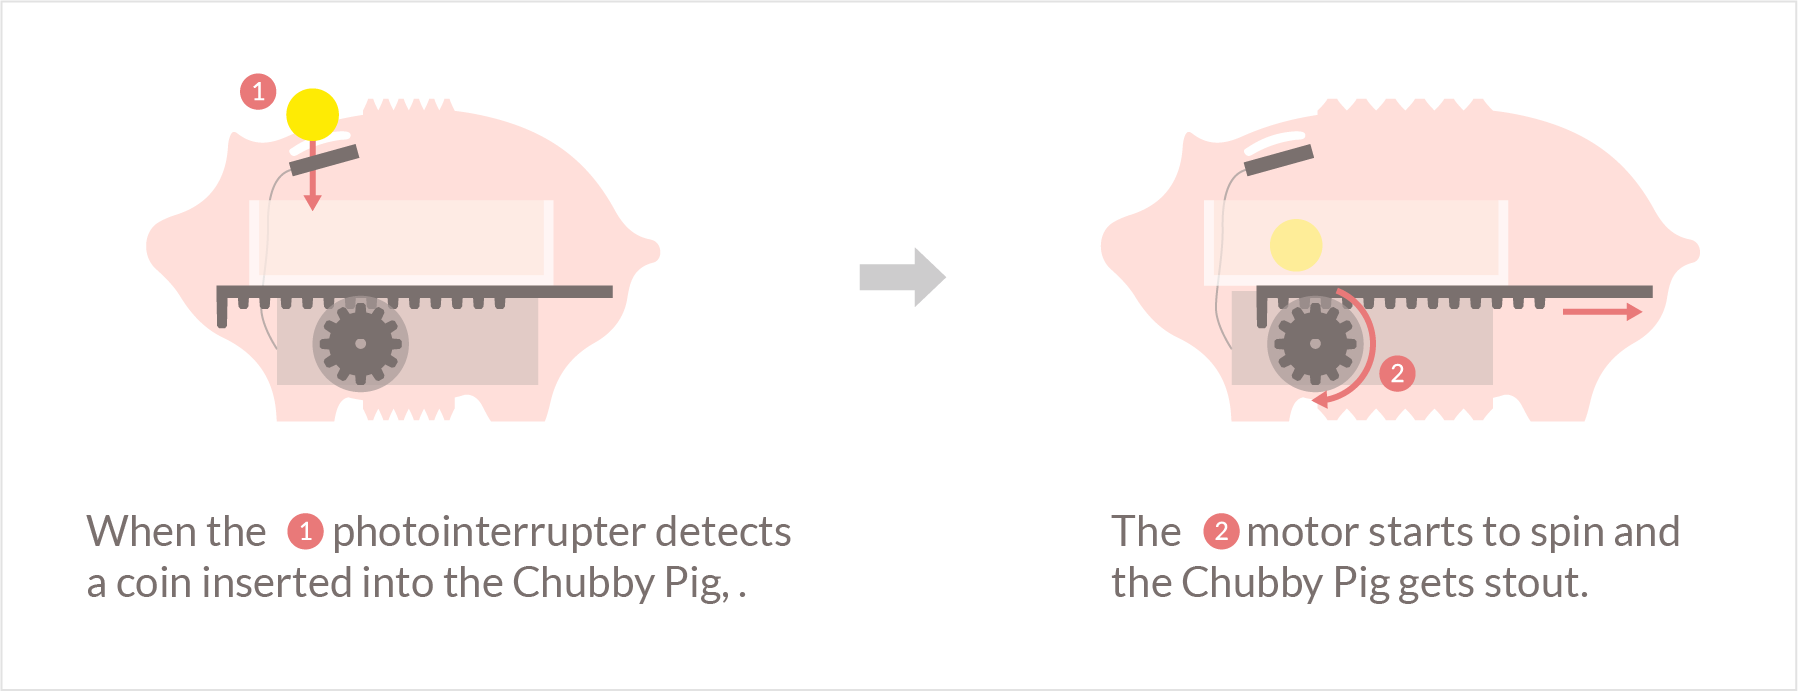 How the Chubby Pig works